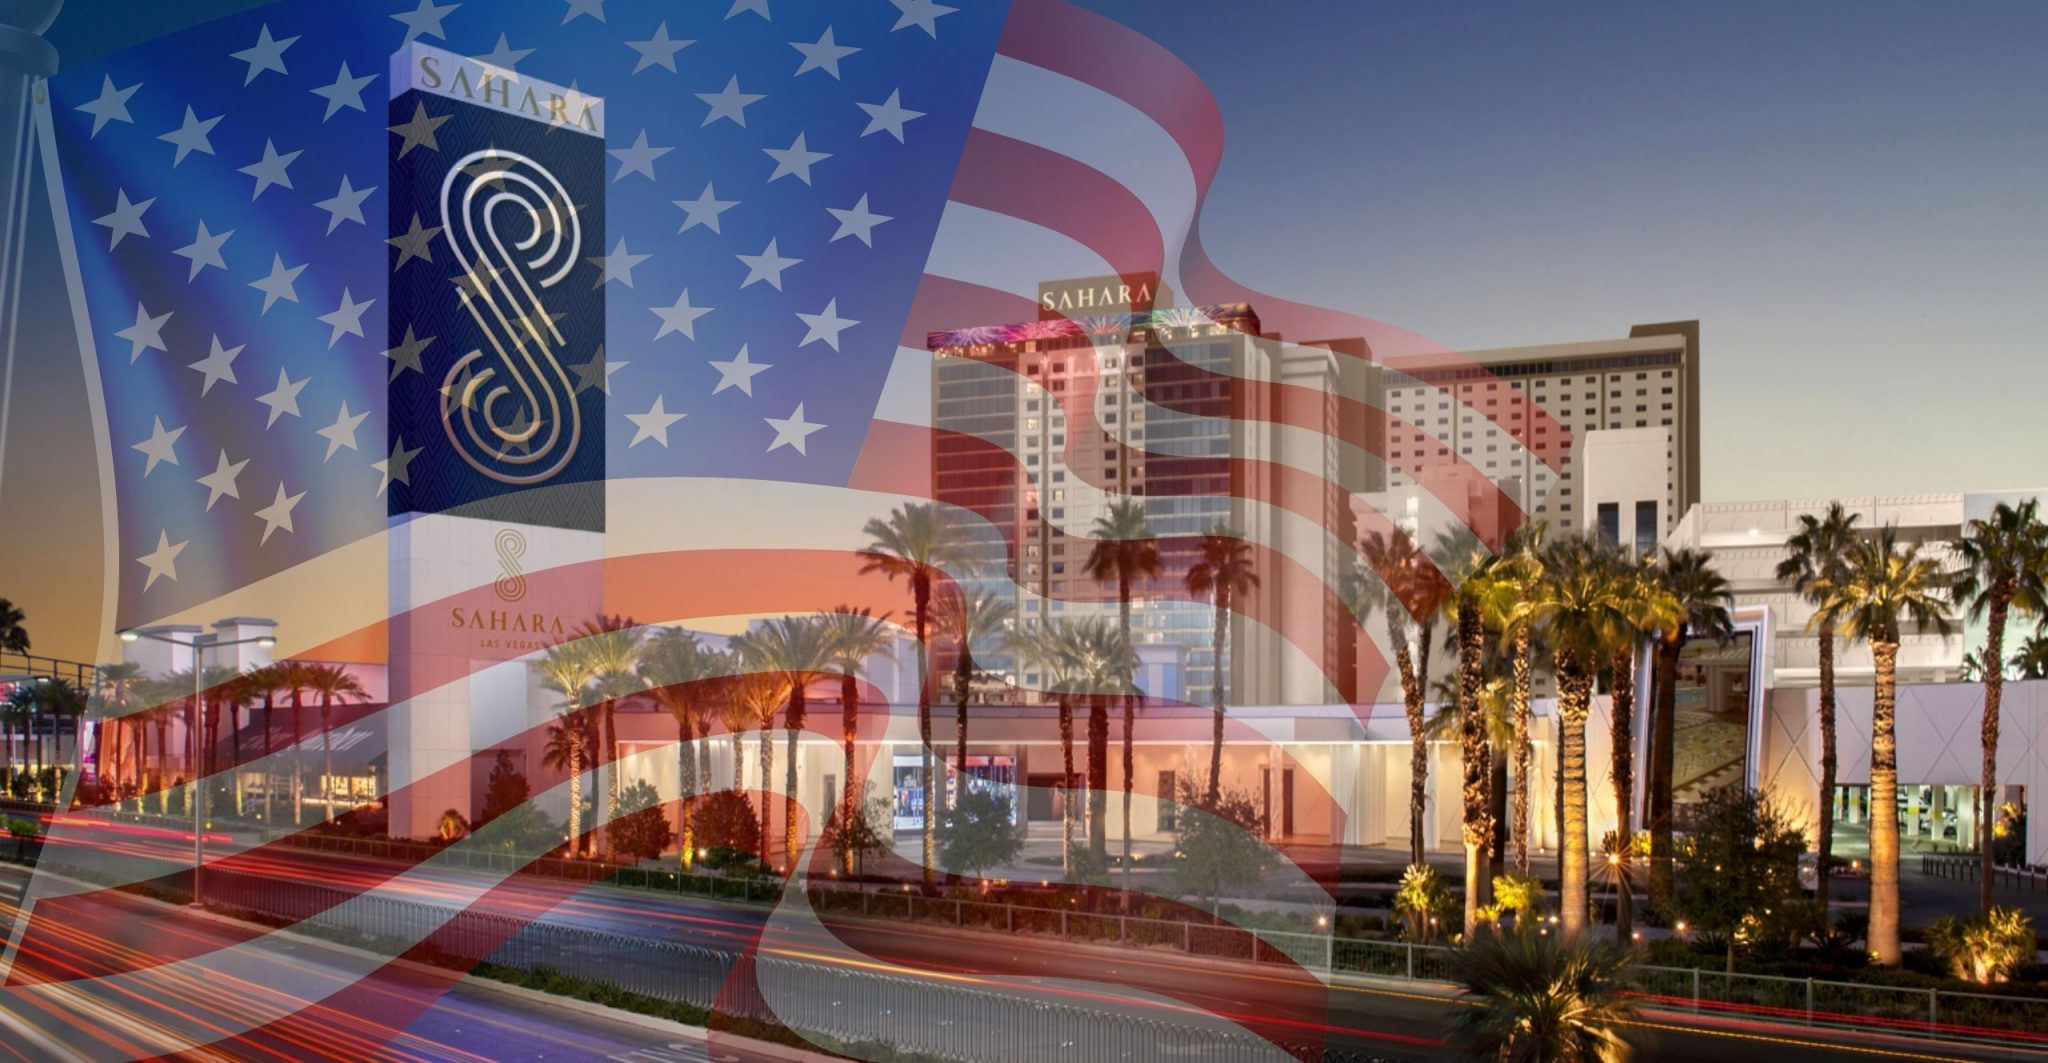 SAHARA Las Vegas with an American flag overlay to show respect for Memorail Day Weekend